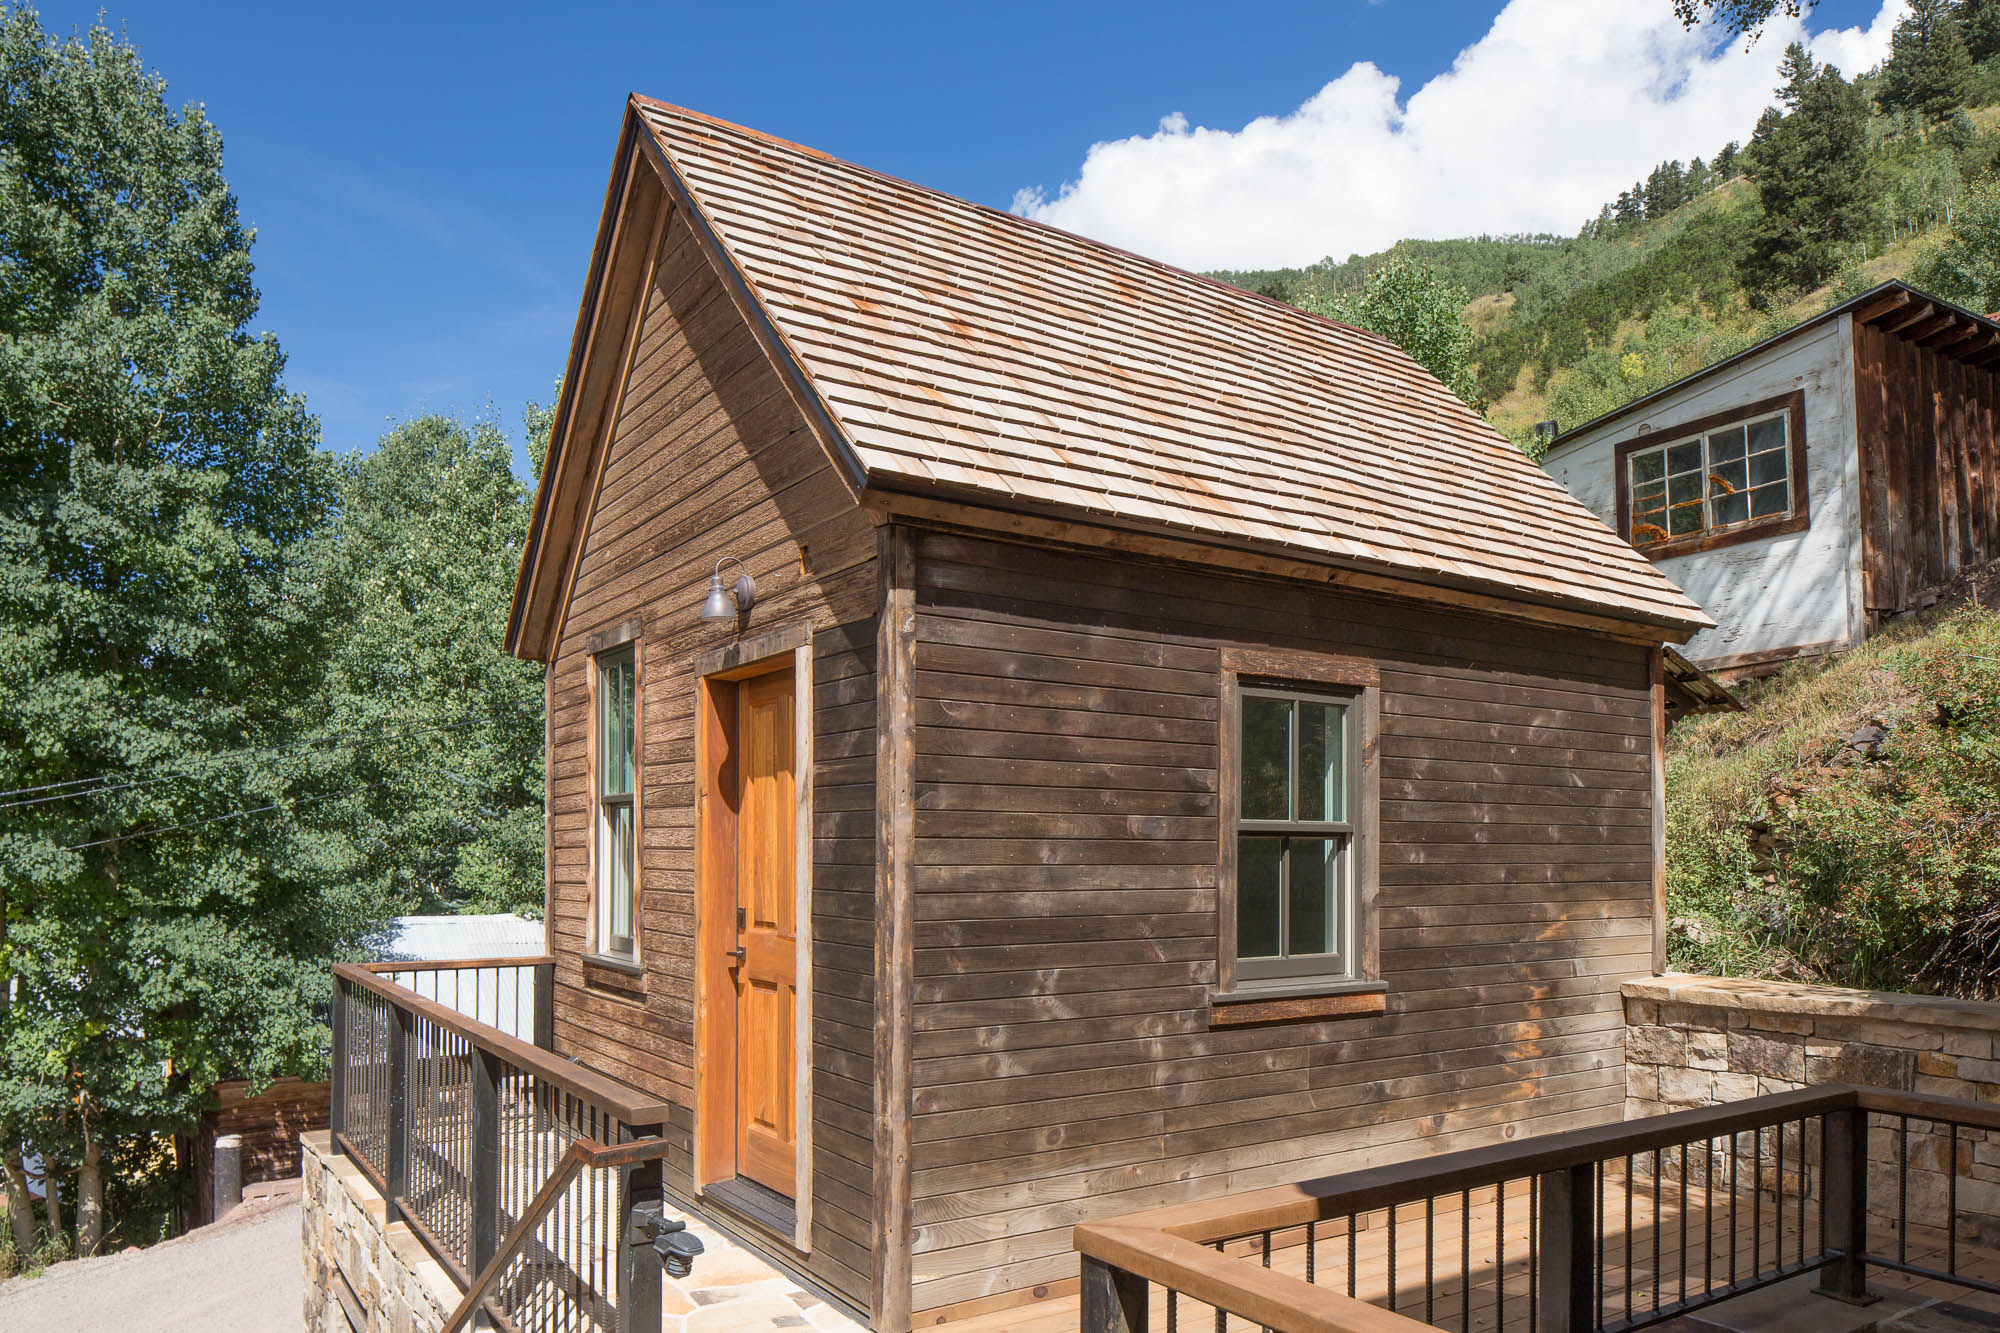 Mining Shed (1880's) in Telluride